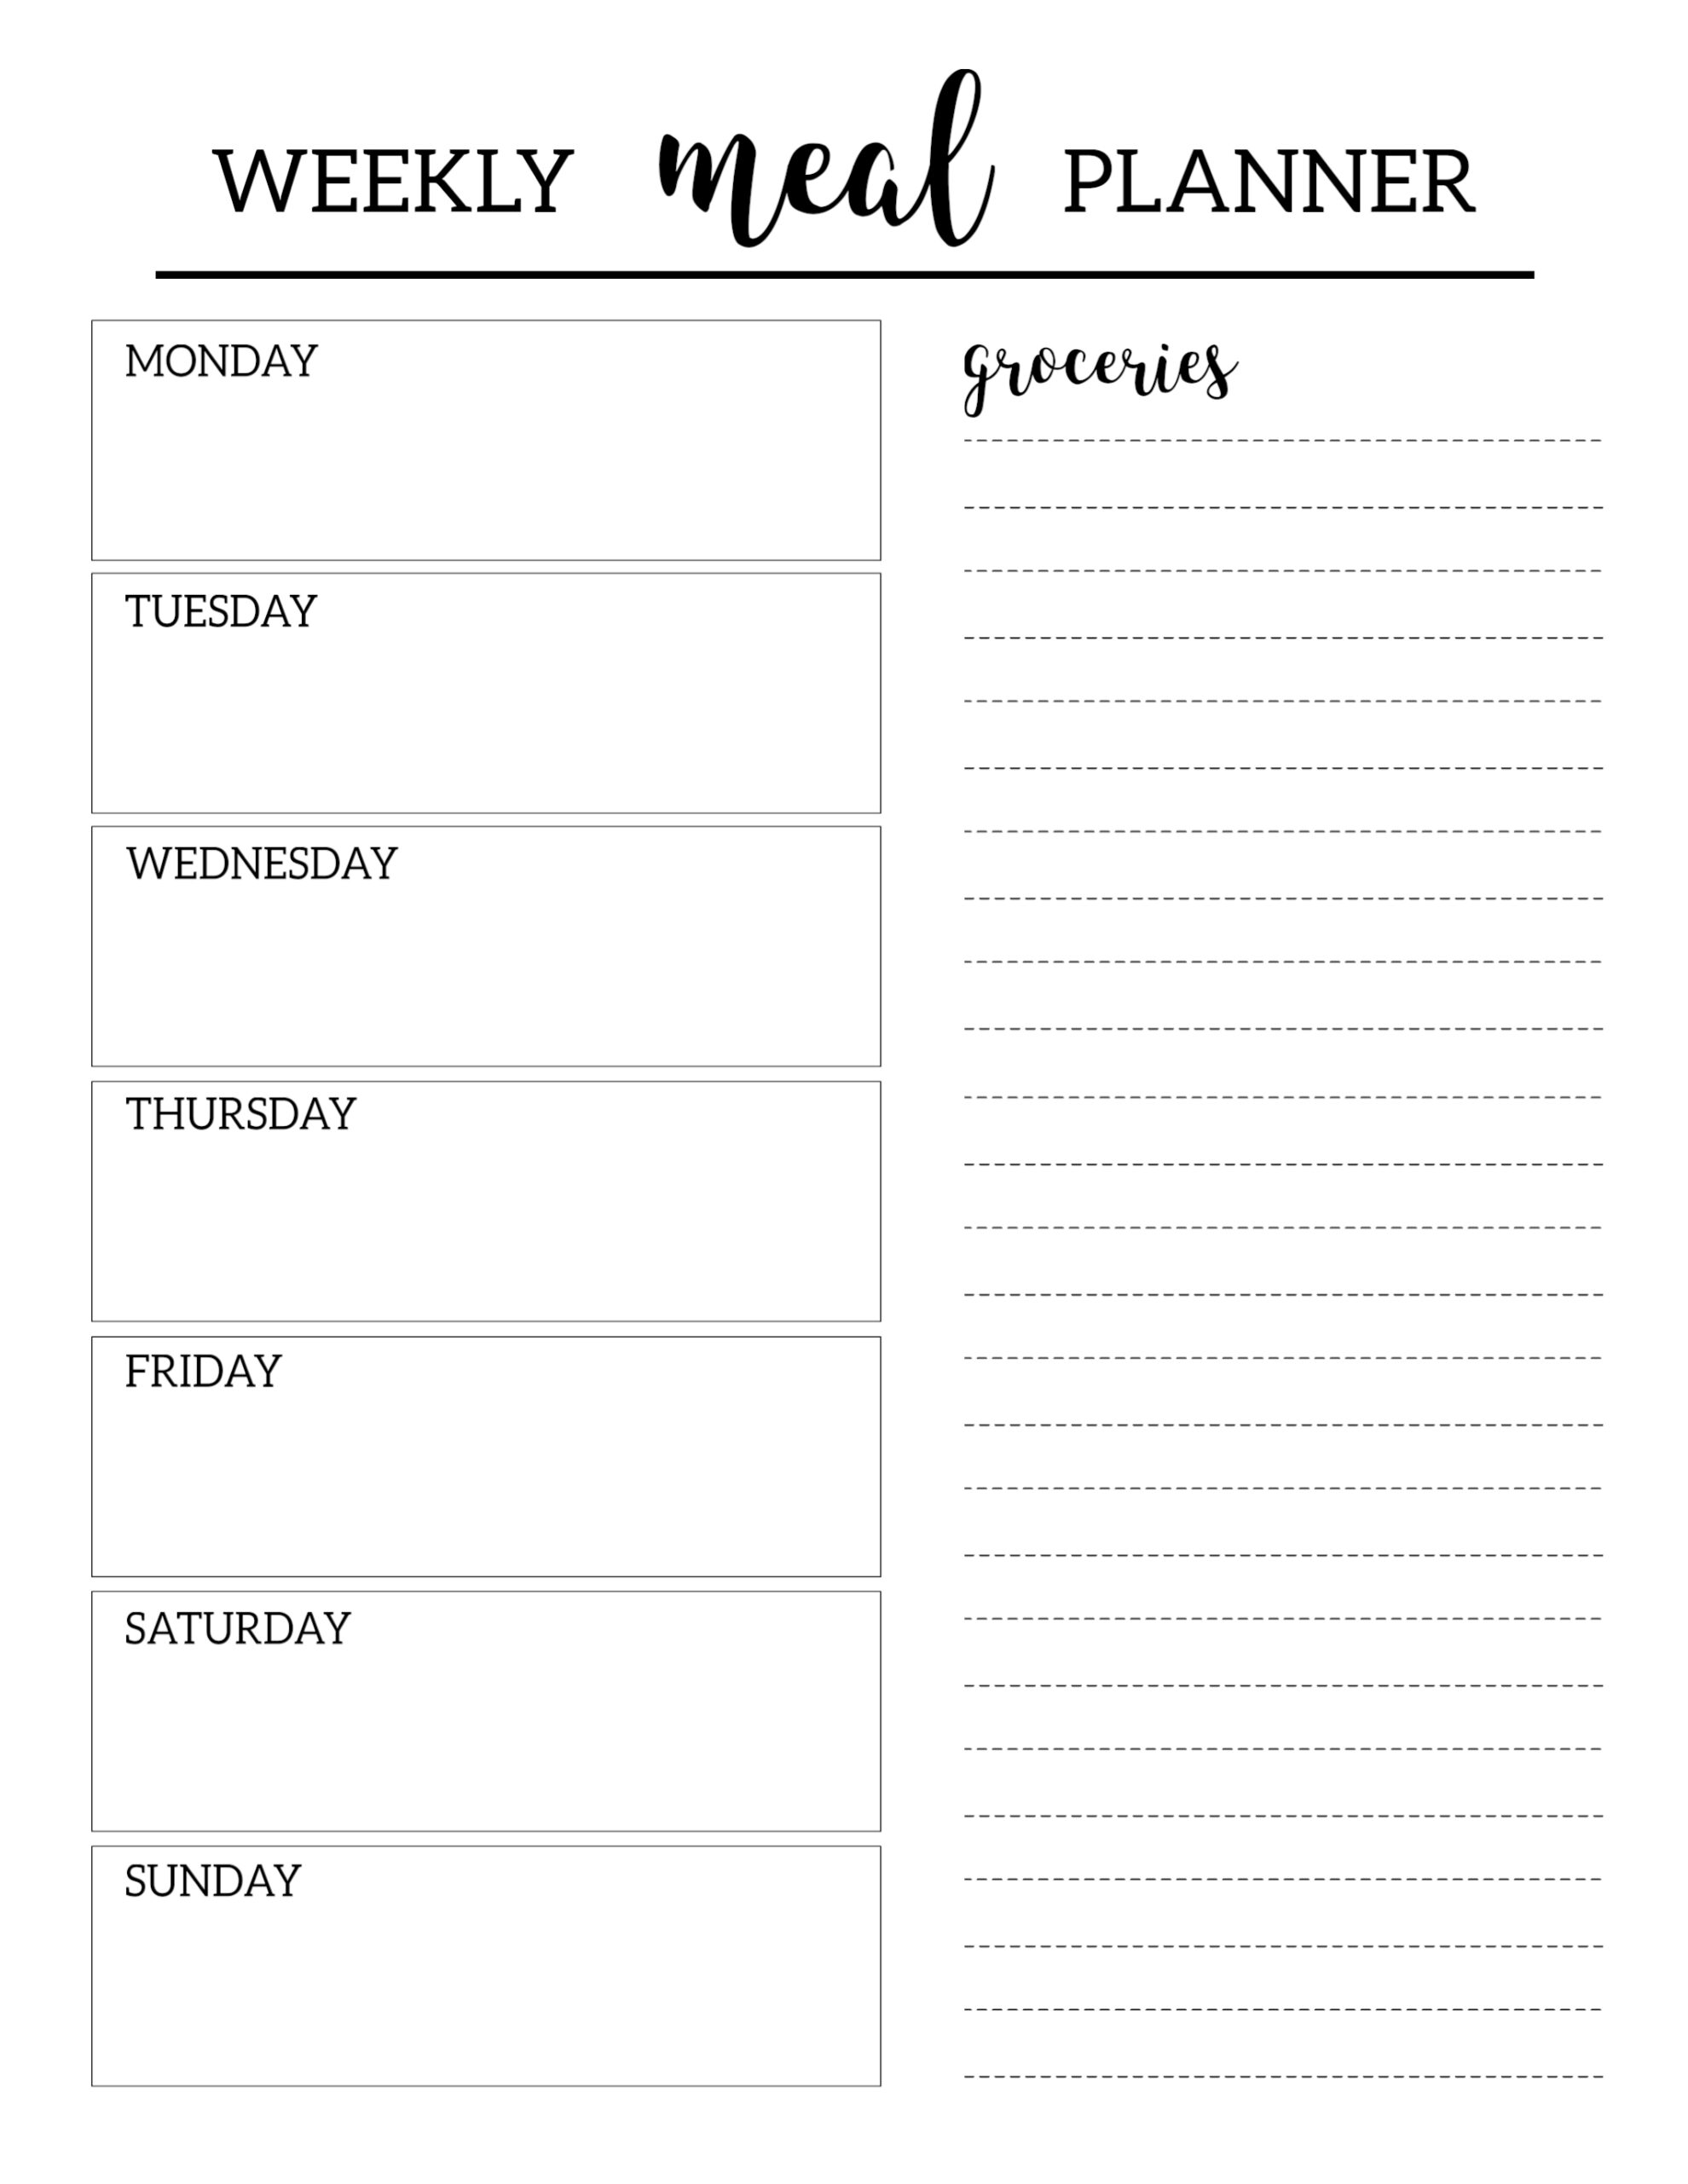 Free Printable Meal Planner Template - Paper Trail Design Within Menu Planner With Grocery List Template